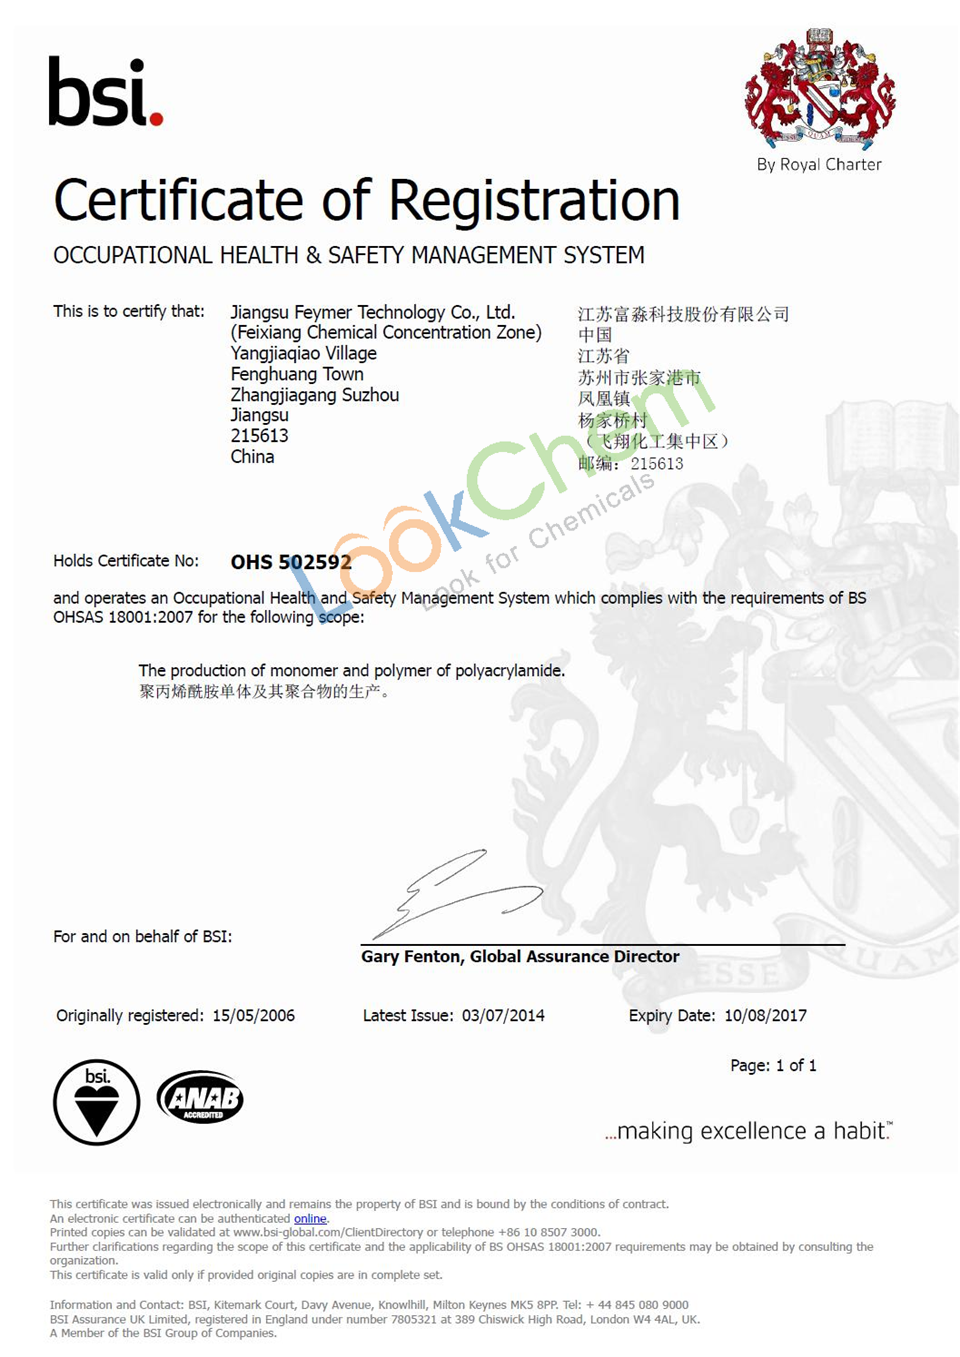 We have the certification which complies with the requirements of BS OHSAS 18001:2007